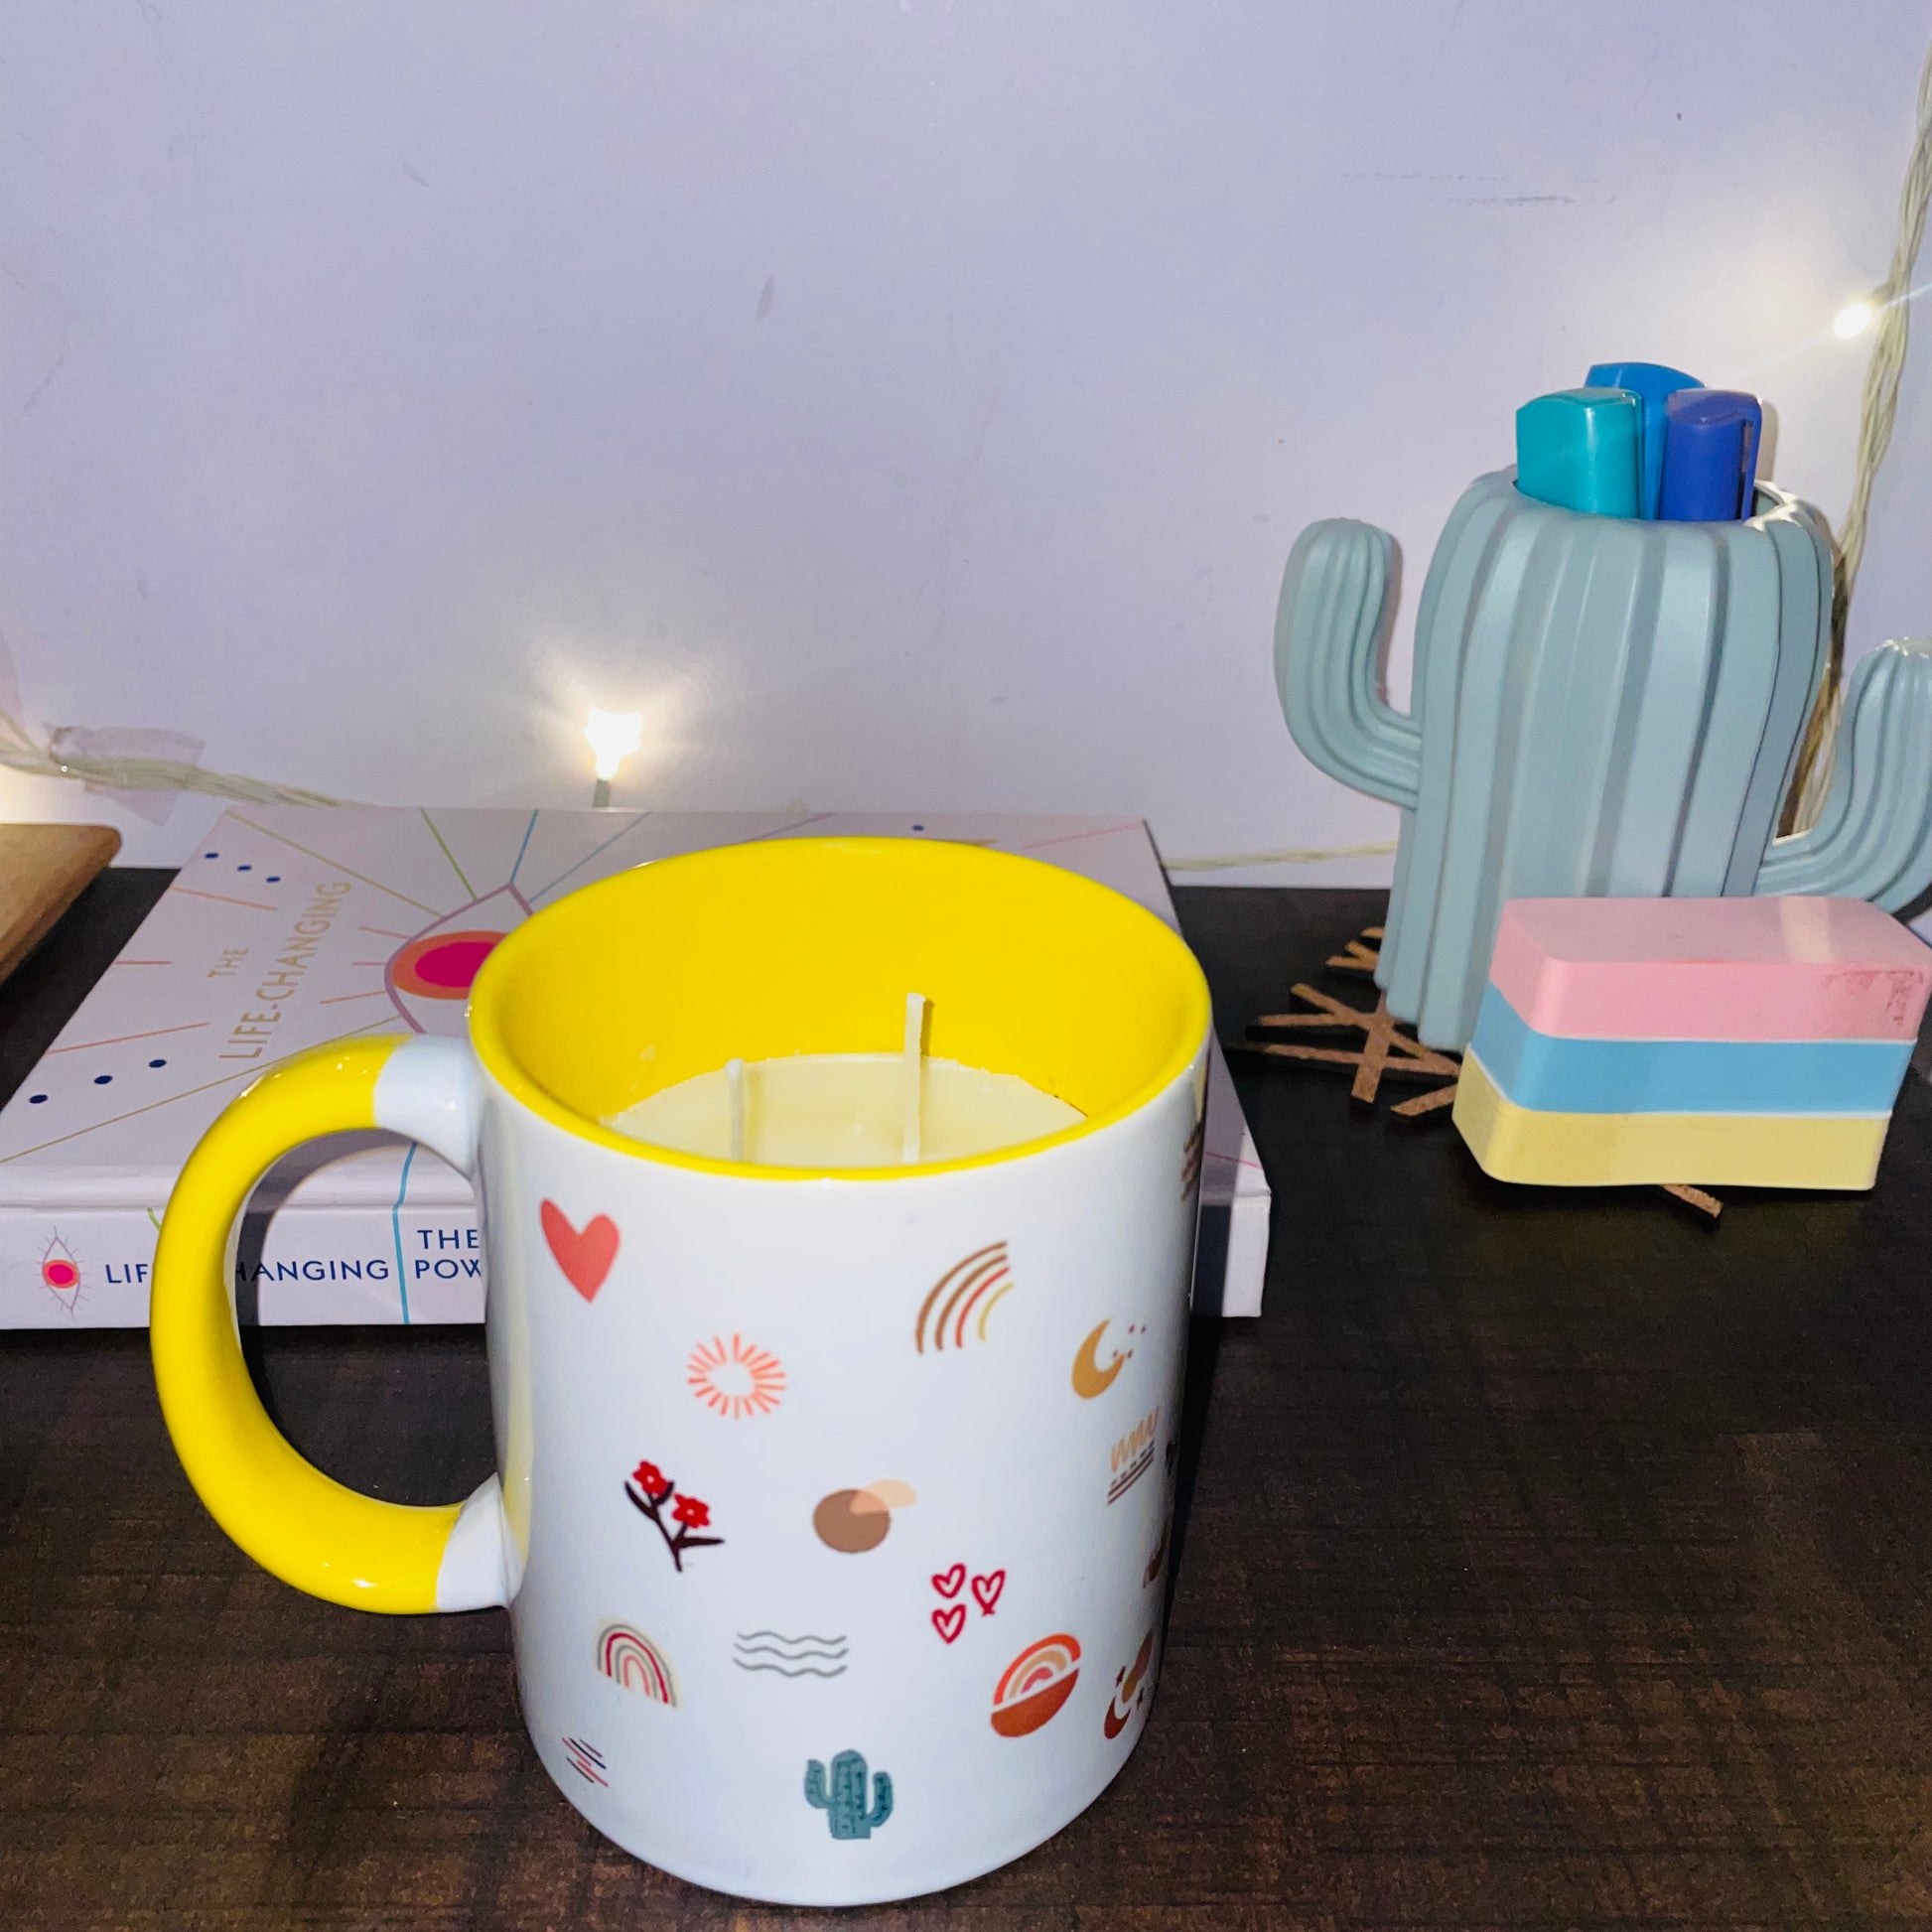 soy wax candle buy online scented candles in india begramot vanilla ylang ylang pastel candle in yellow ceramic coffee mug turn up your magic pastel CANDL from posh the studio bath and body works candles india buy online